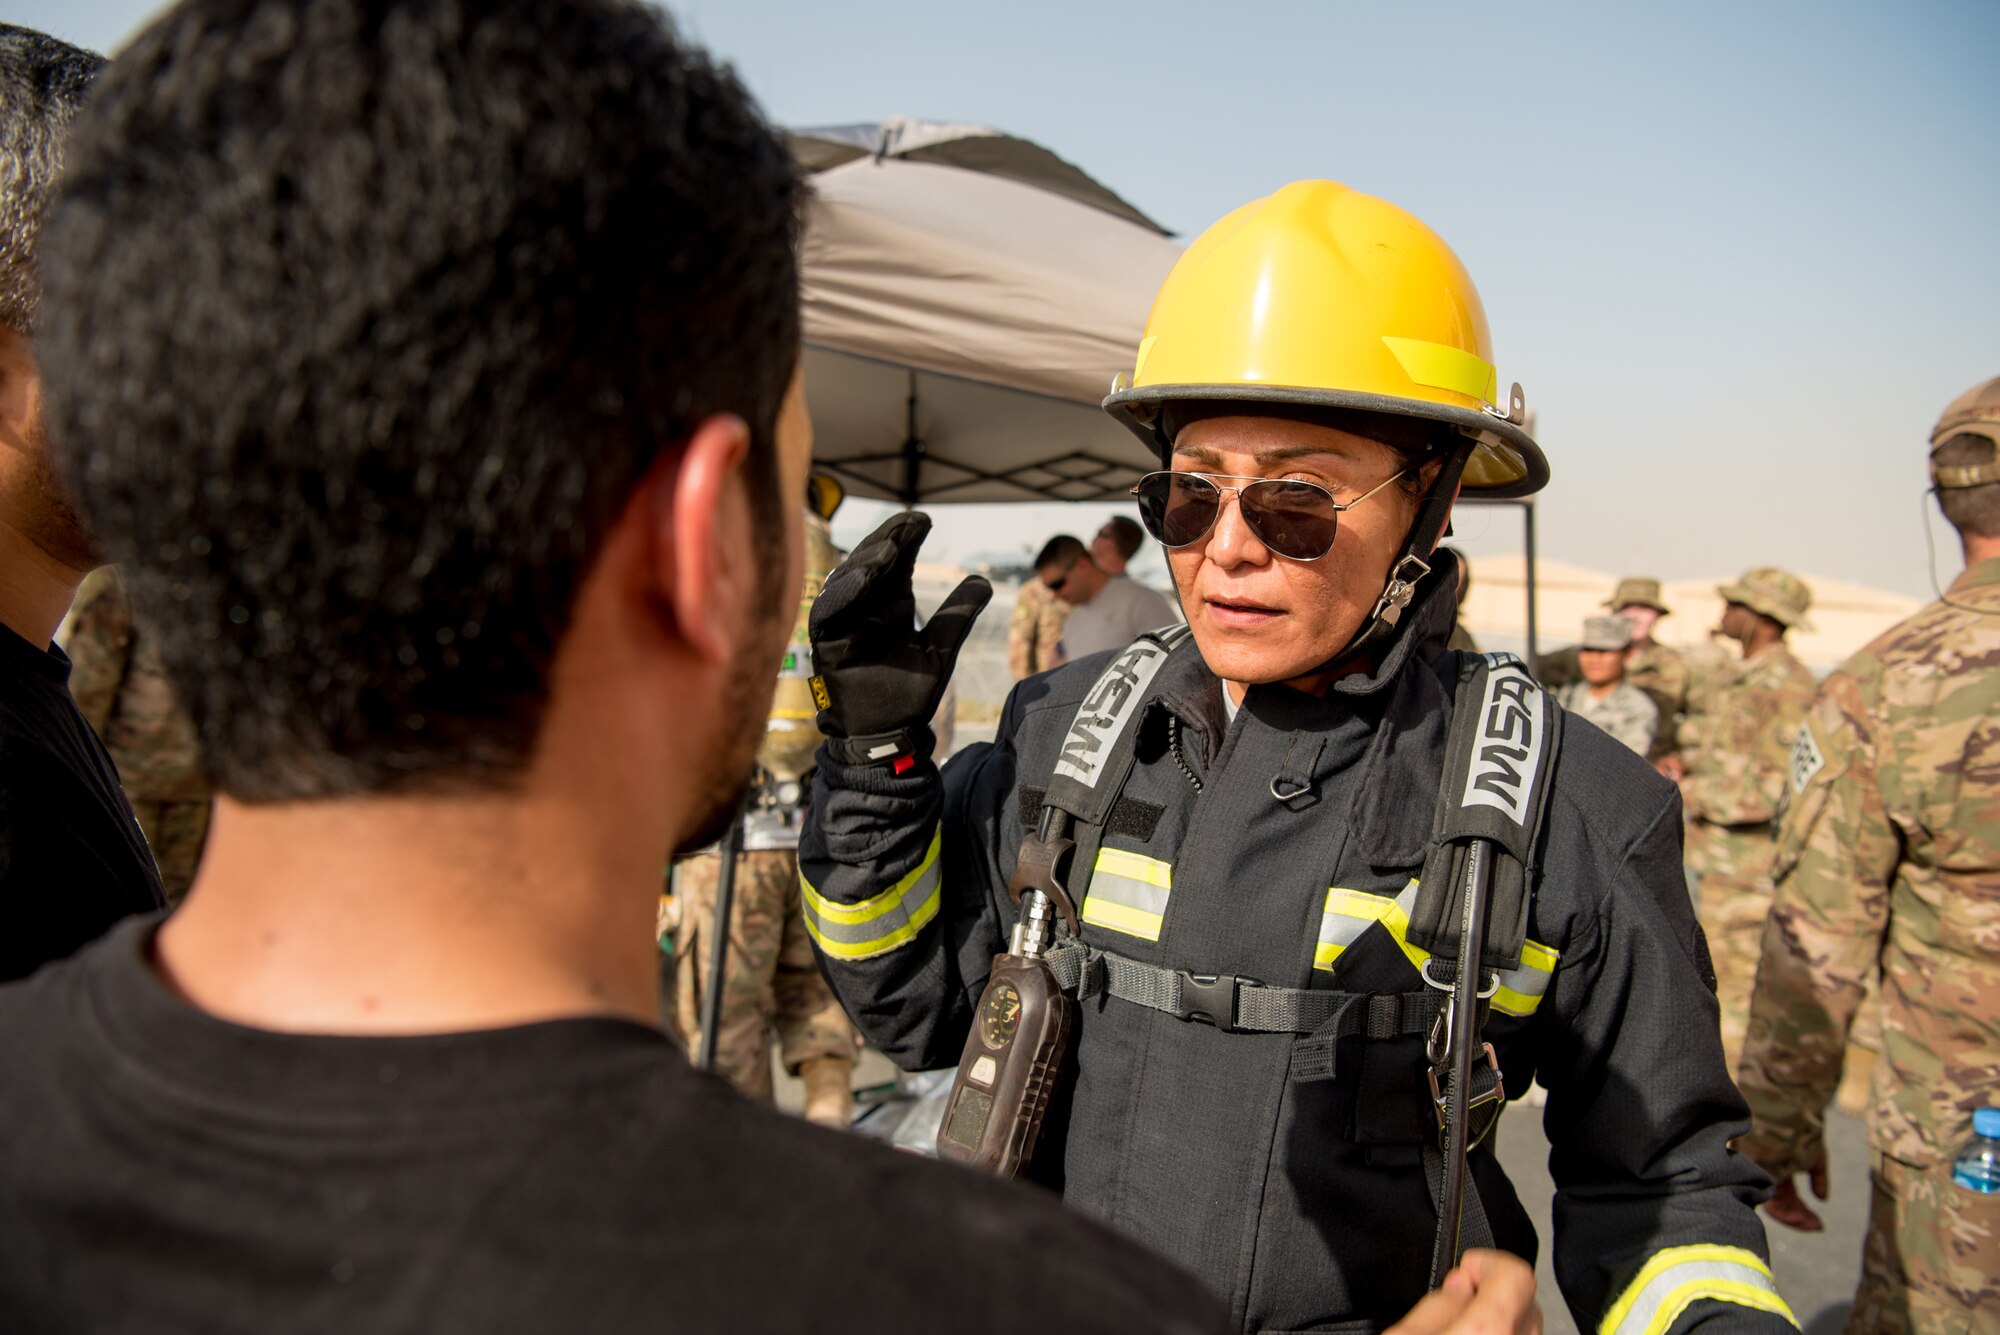 Senior Master Sgt. Mireya Calderafavela, force protection superintendent from the 379th Expeditionary Civil Engineer Squadron, prepares to participate in a firefighter challenge exercise at Al Udeid Air Base, Qatar, March 8, 2018. The a exercise, a strenuous course designed to test physical fitness and fire response capabilities, was organized by firefighters from the 379th ECES and Qatar Emiri Air Force. (U.S. Air Force photo by Staff Sgt. Joshua Horton)